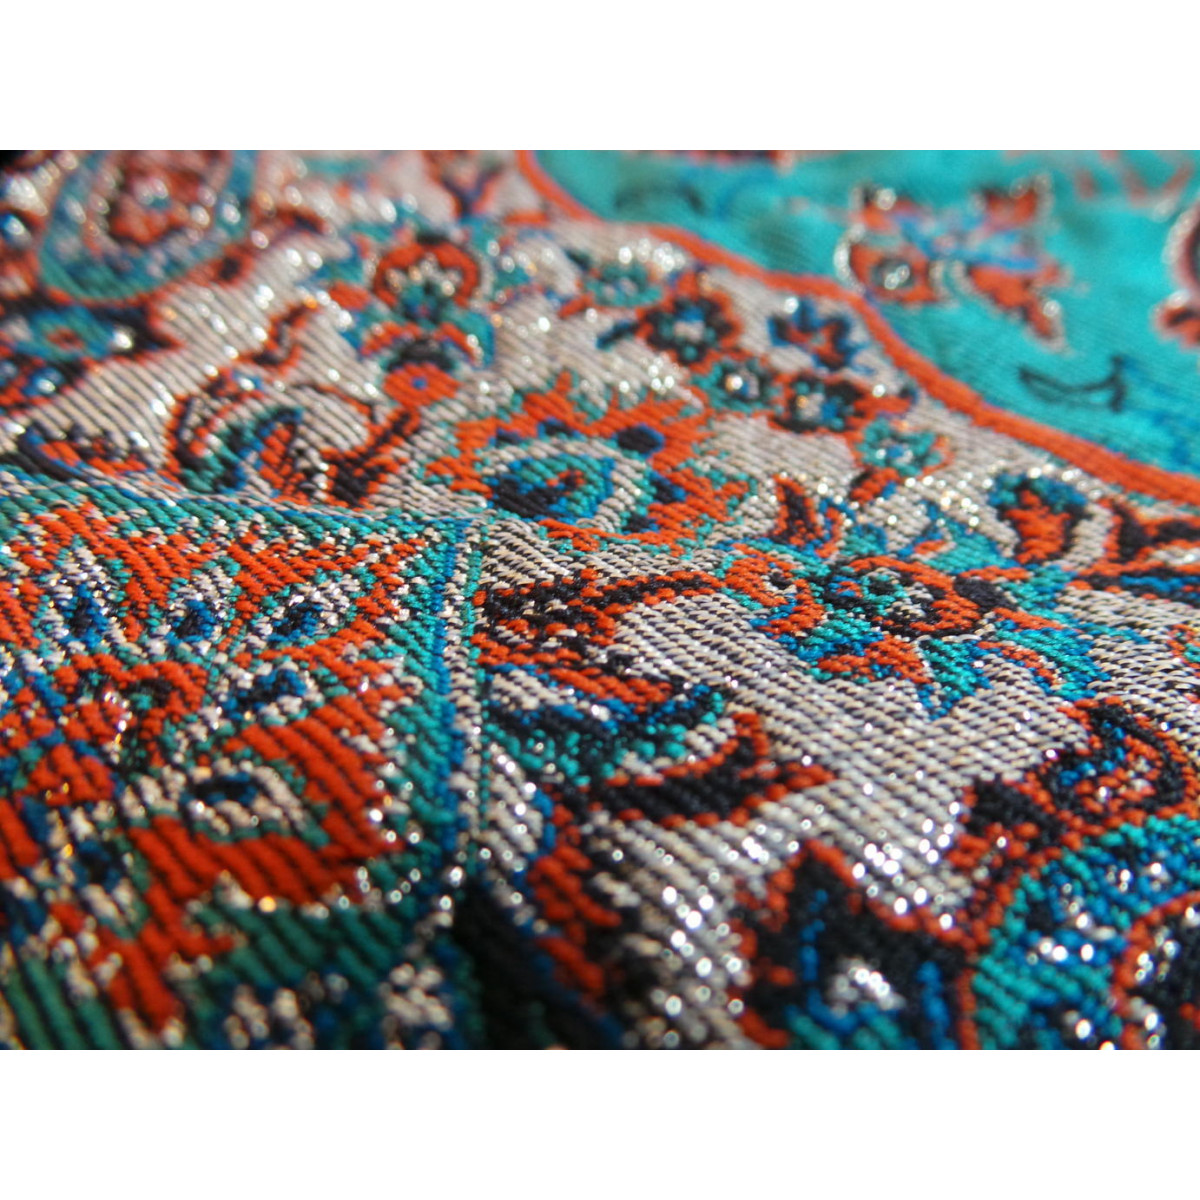 Termeh Luxury Tablecloth/Cushion Cover - HT3003-Persian Handicrafts